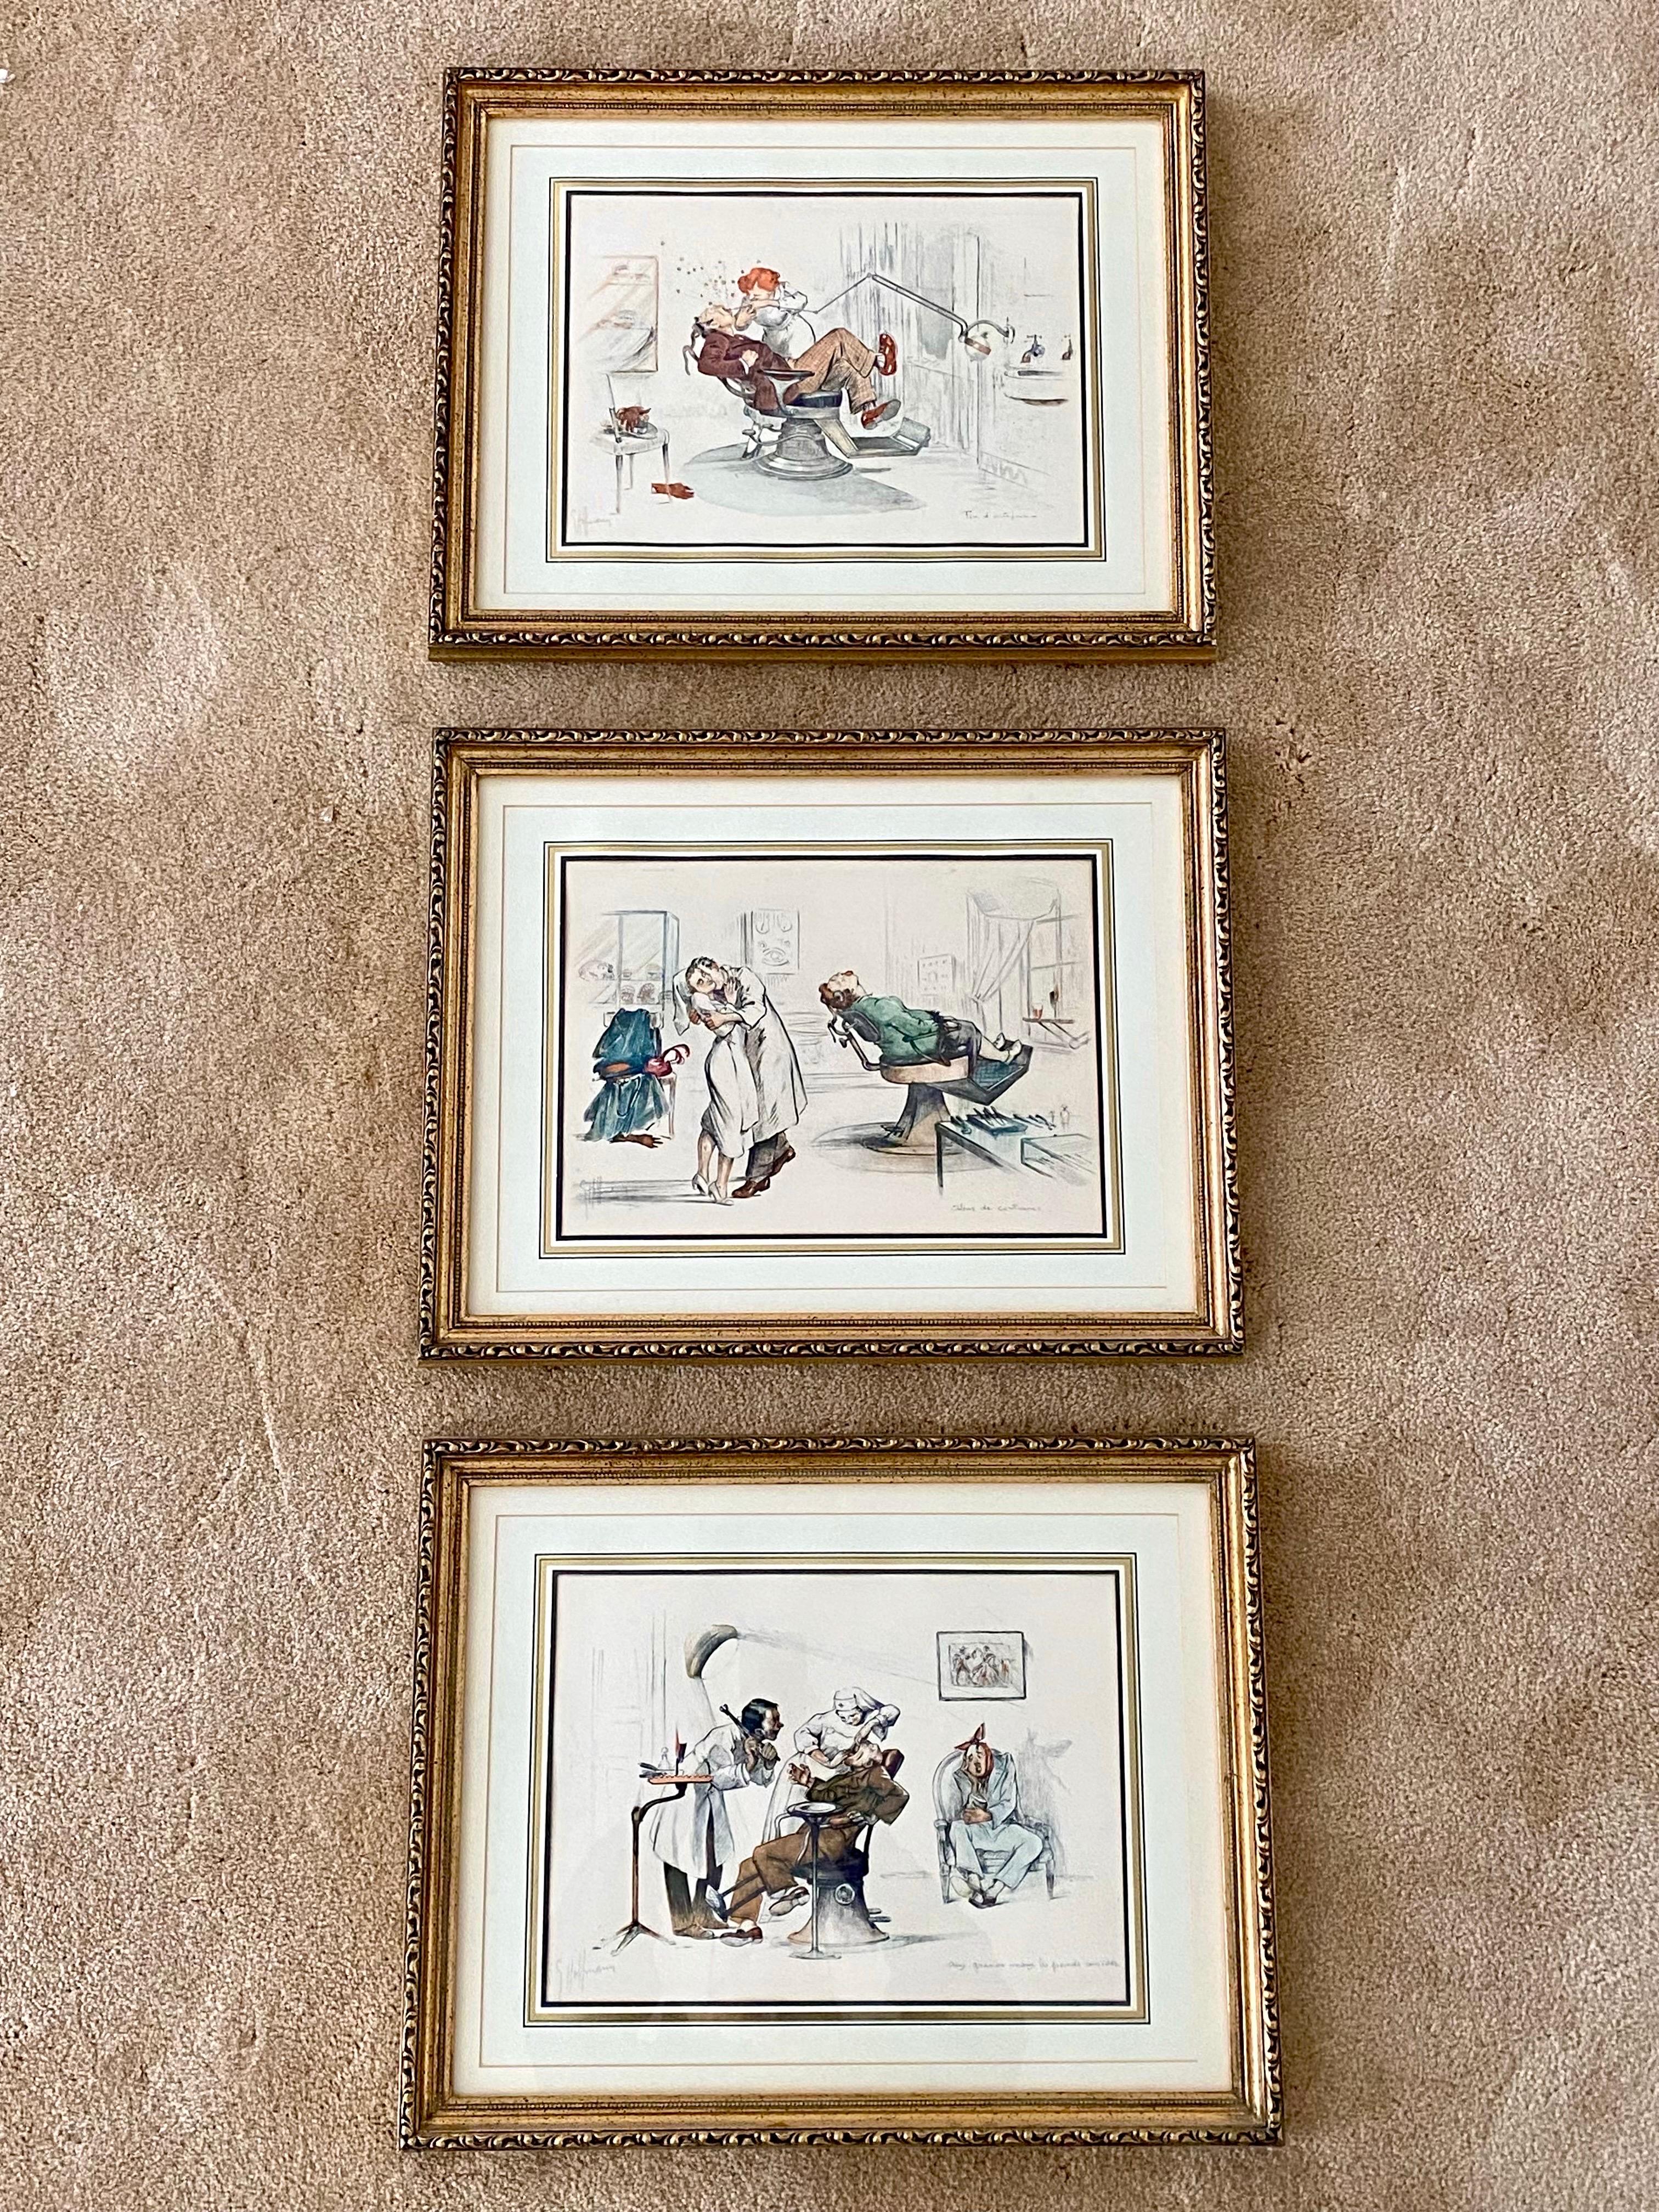 A lovely set of three circa 1930 hand colored and signed satirical lithograph prints by French artist Gaston Hoffmann (1883-1977). Gaston Hoffmann worked as a painter, decorator, cartoonist, and illustrator in France and Quebec throughout the first